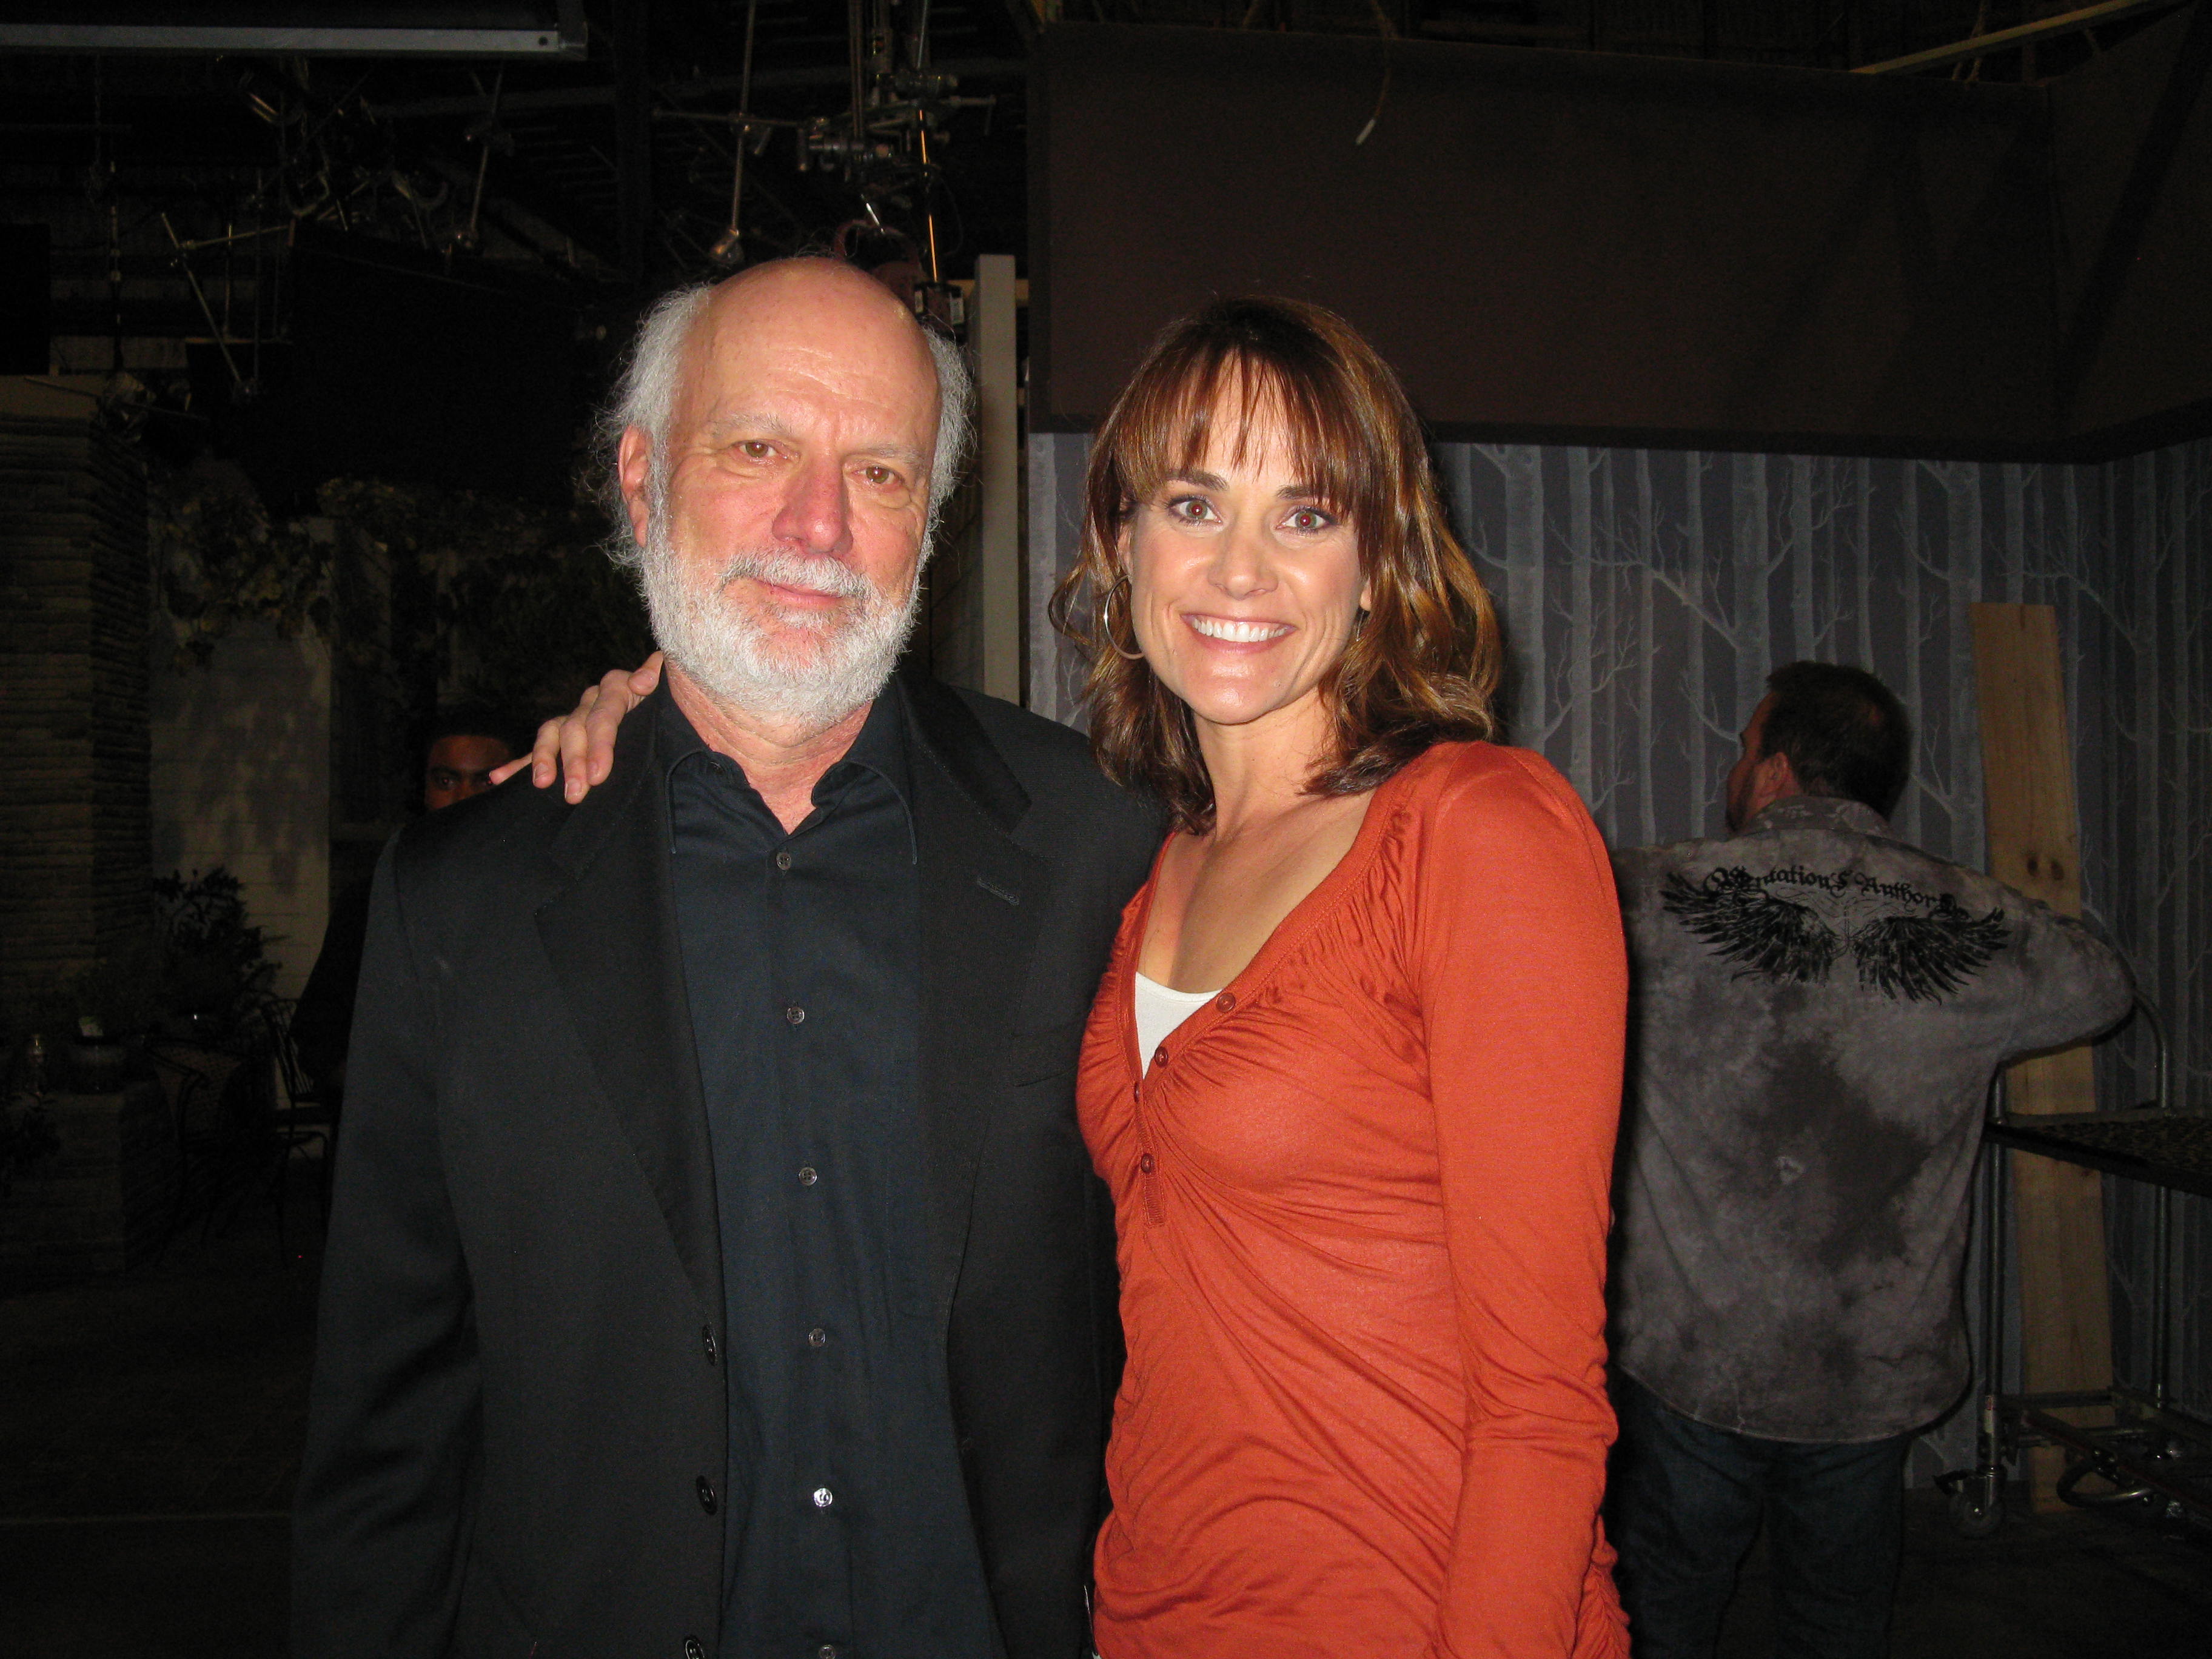 Palmer With James Burrows on the set of Romantically Challenged.